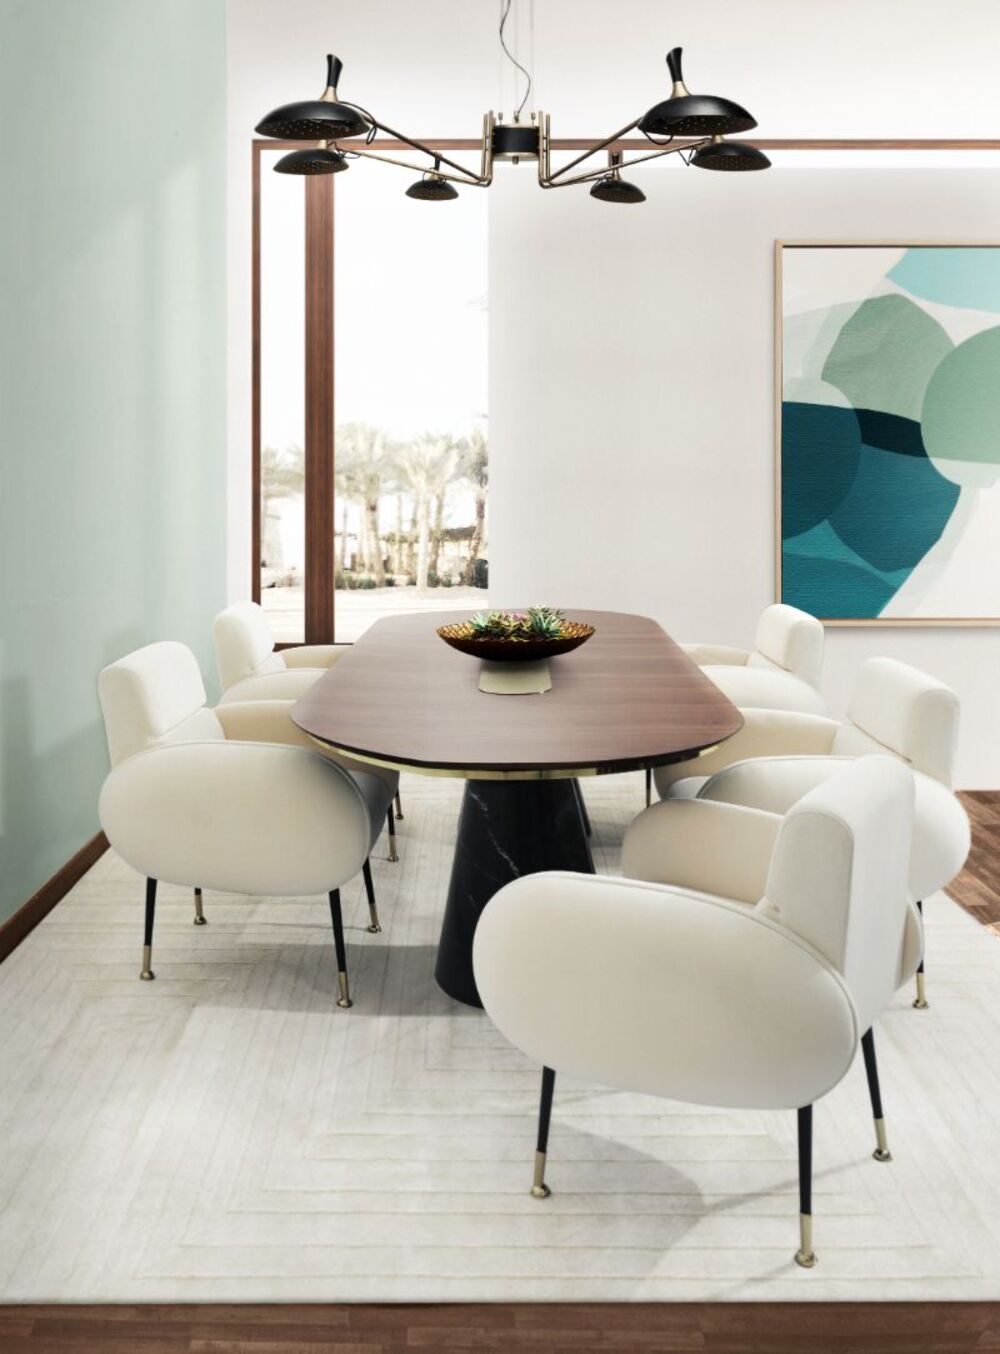 The Best Minimalist Rugs For The Dining Room